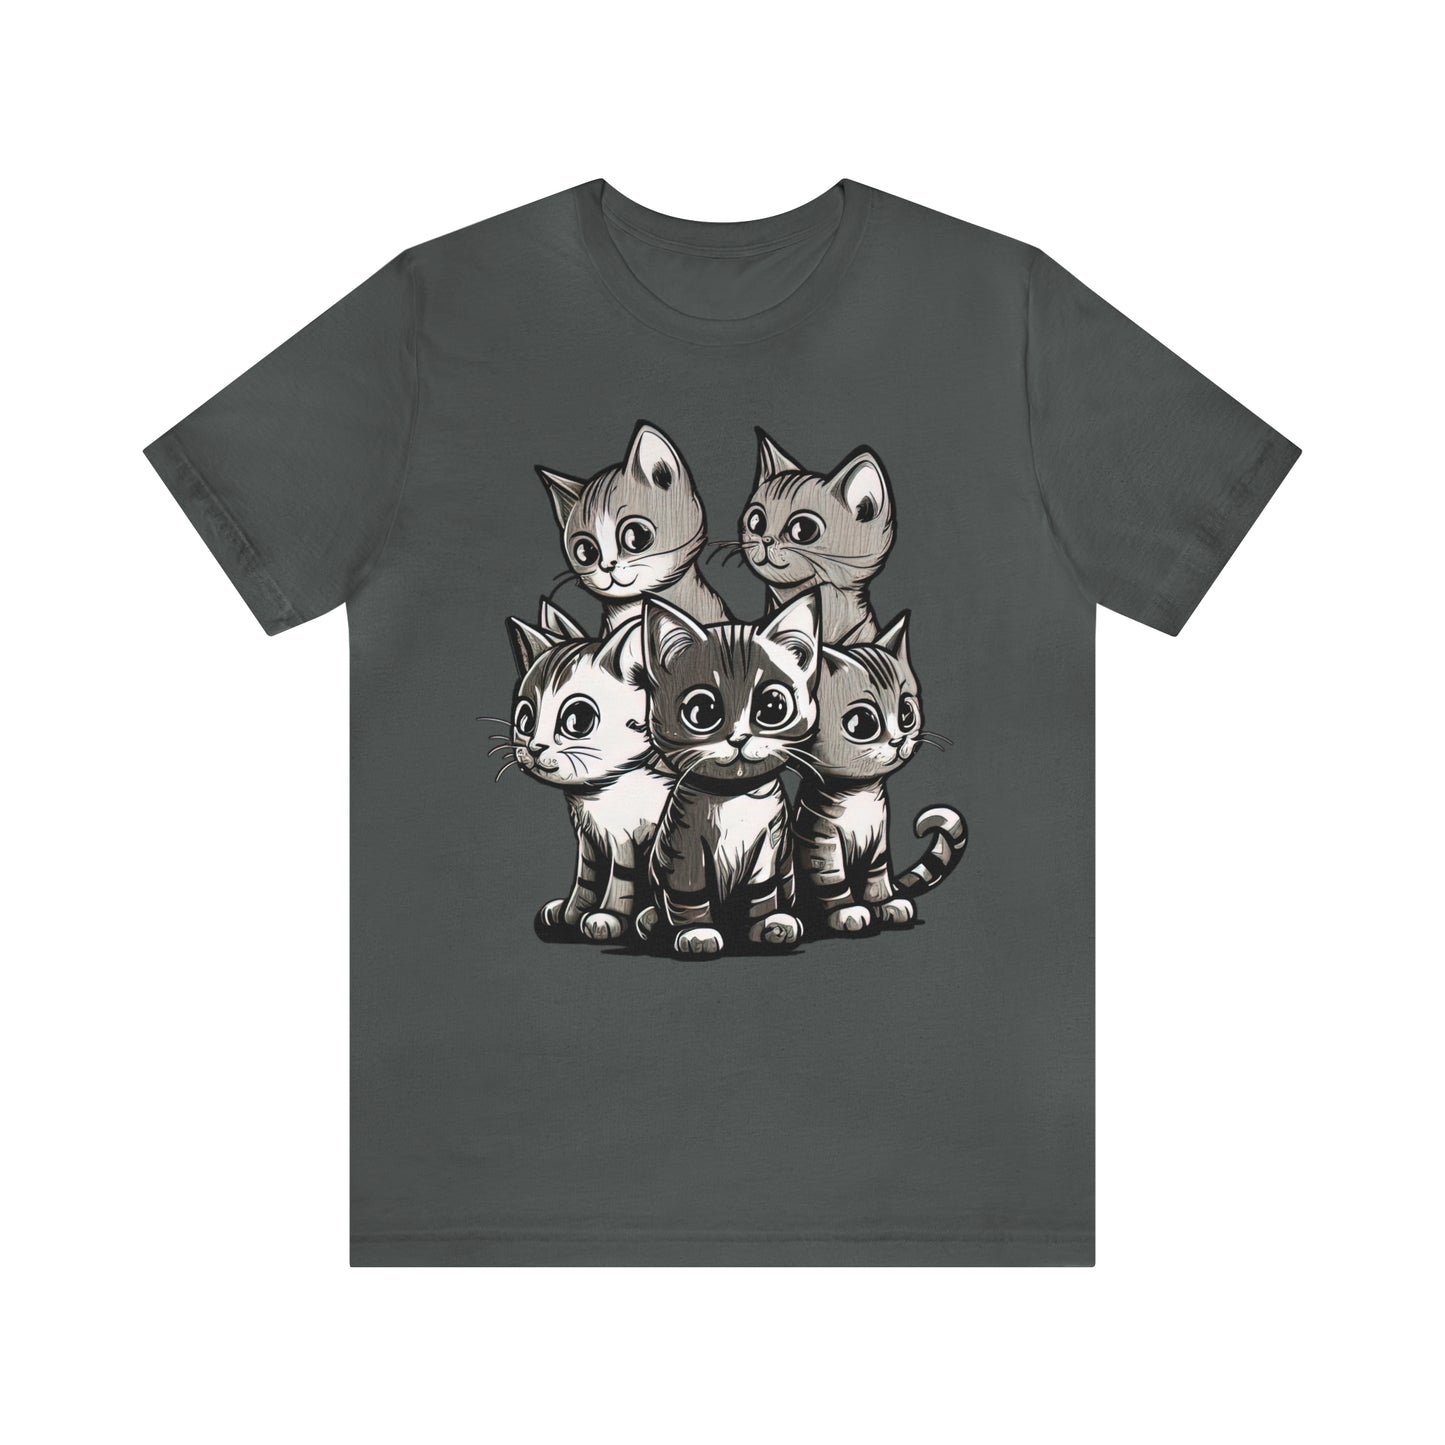 psychedelicBRANDz's Nocturnal Whisker Symphony featuring a group of cats on an asphalt shirt